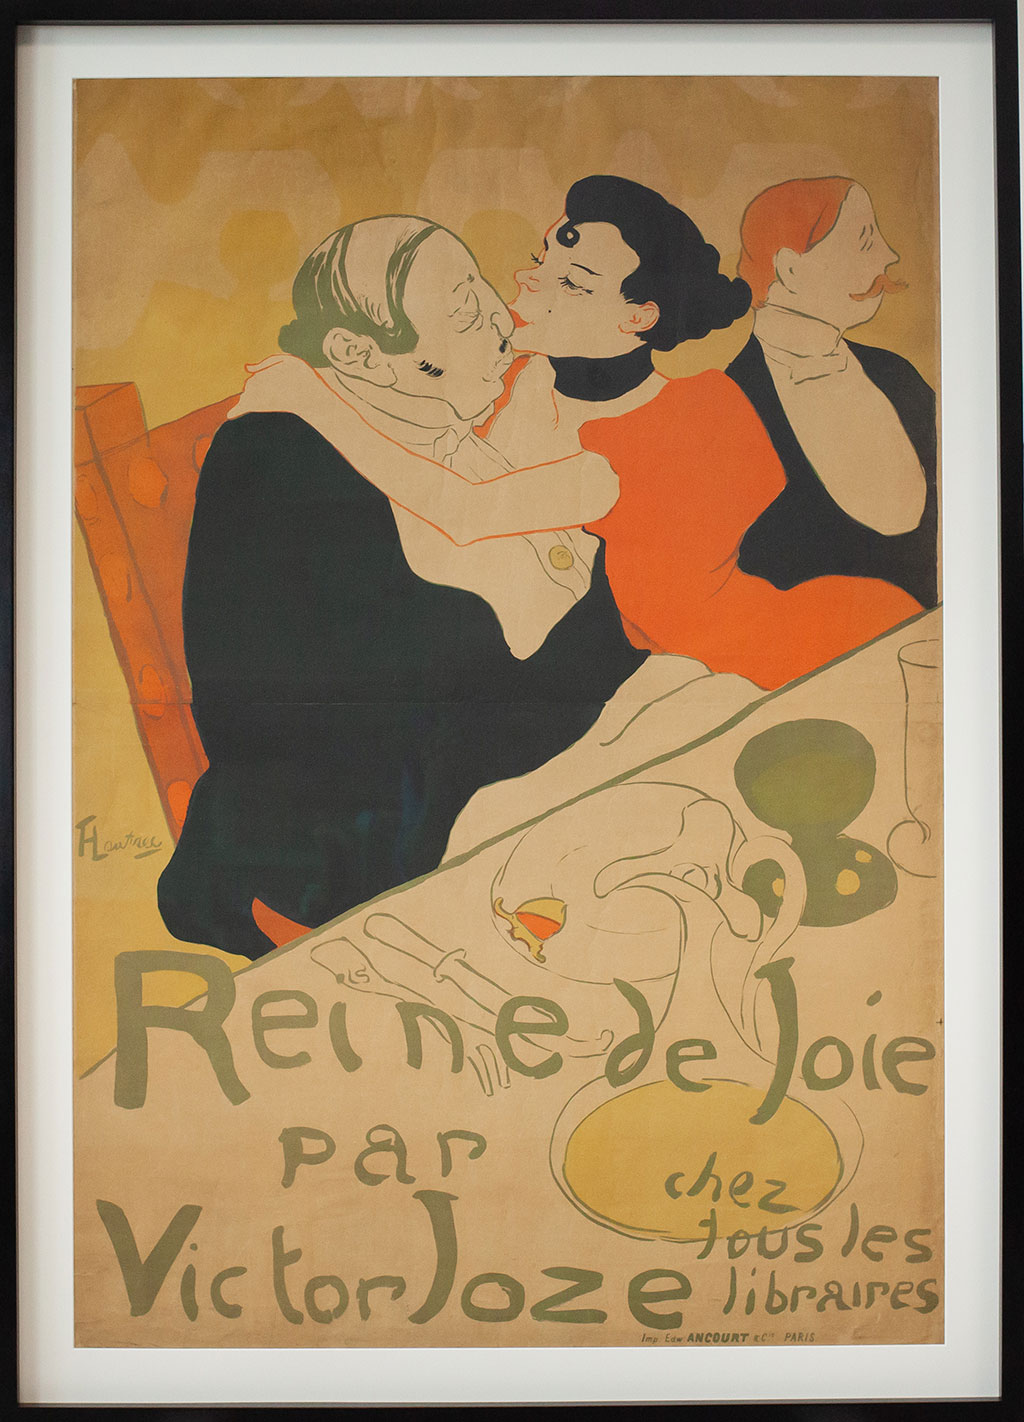 Toulouse-Lautrec was known for his bold gestural lines and unconventional compositions.